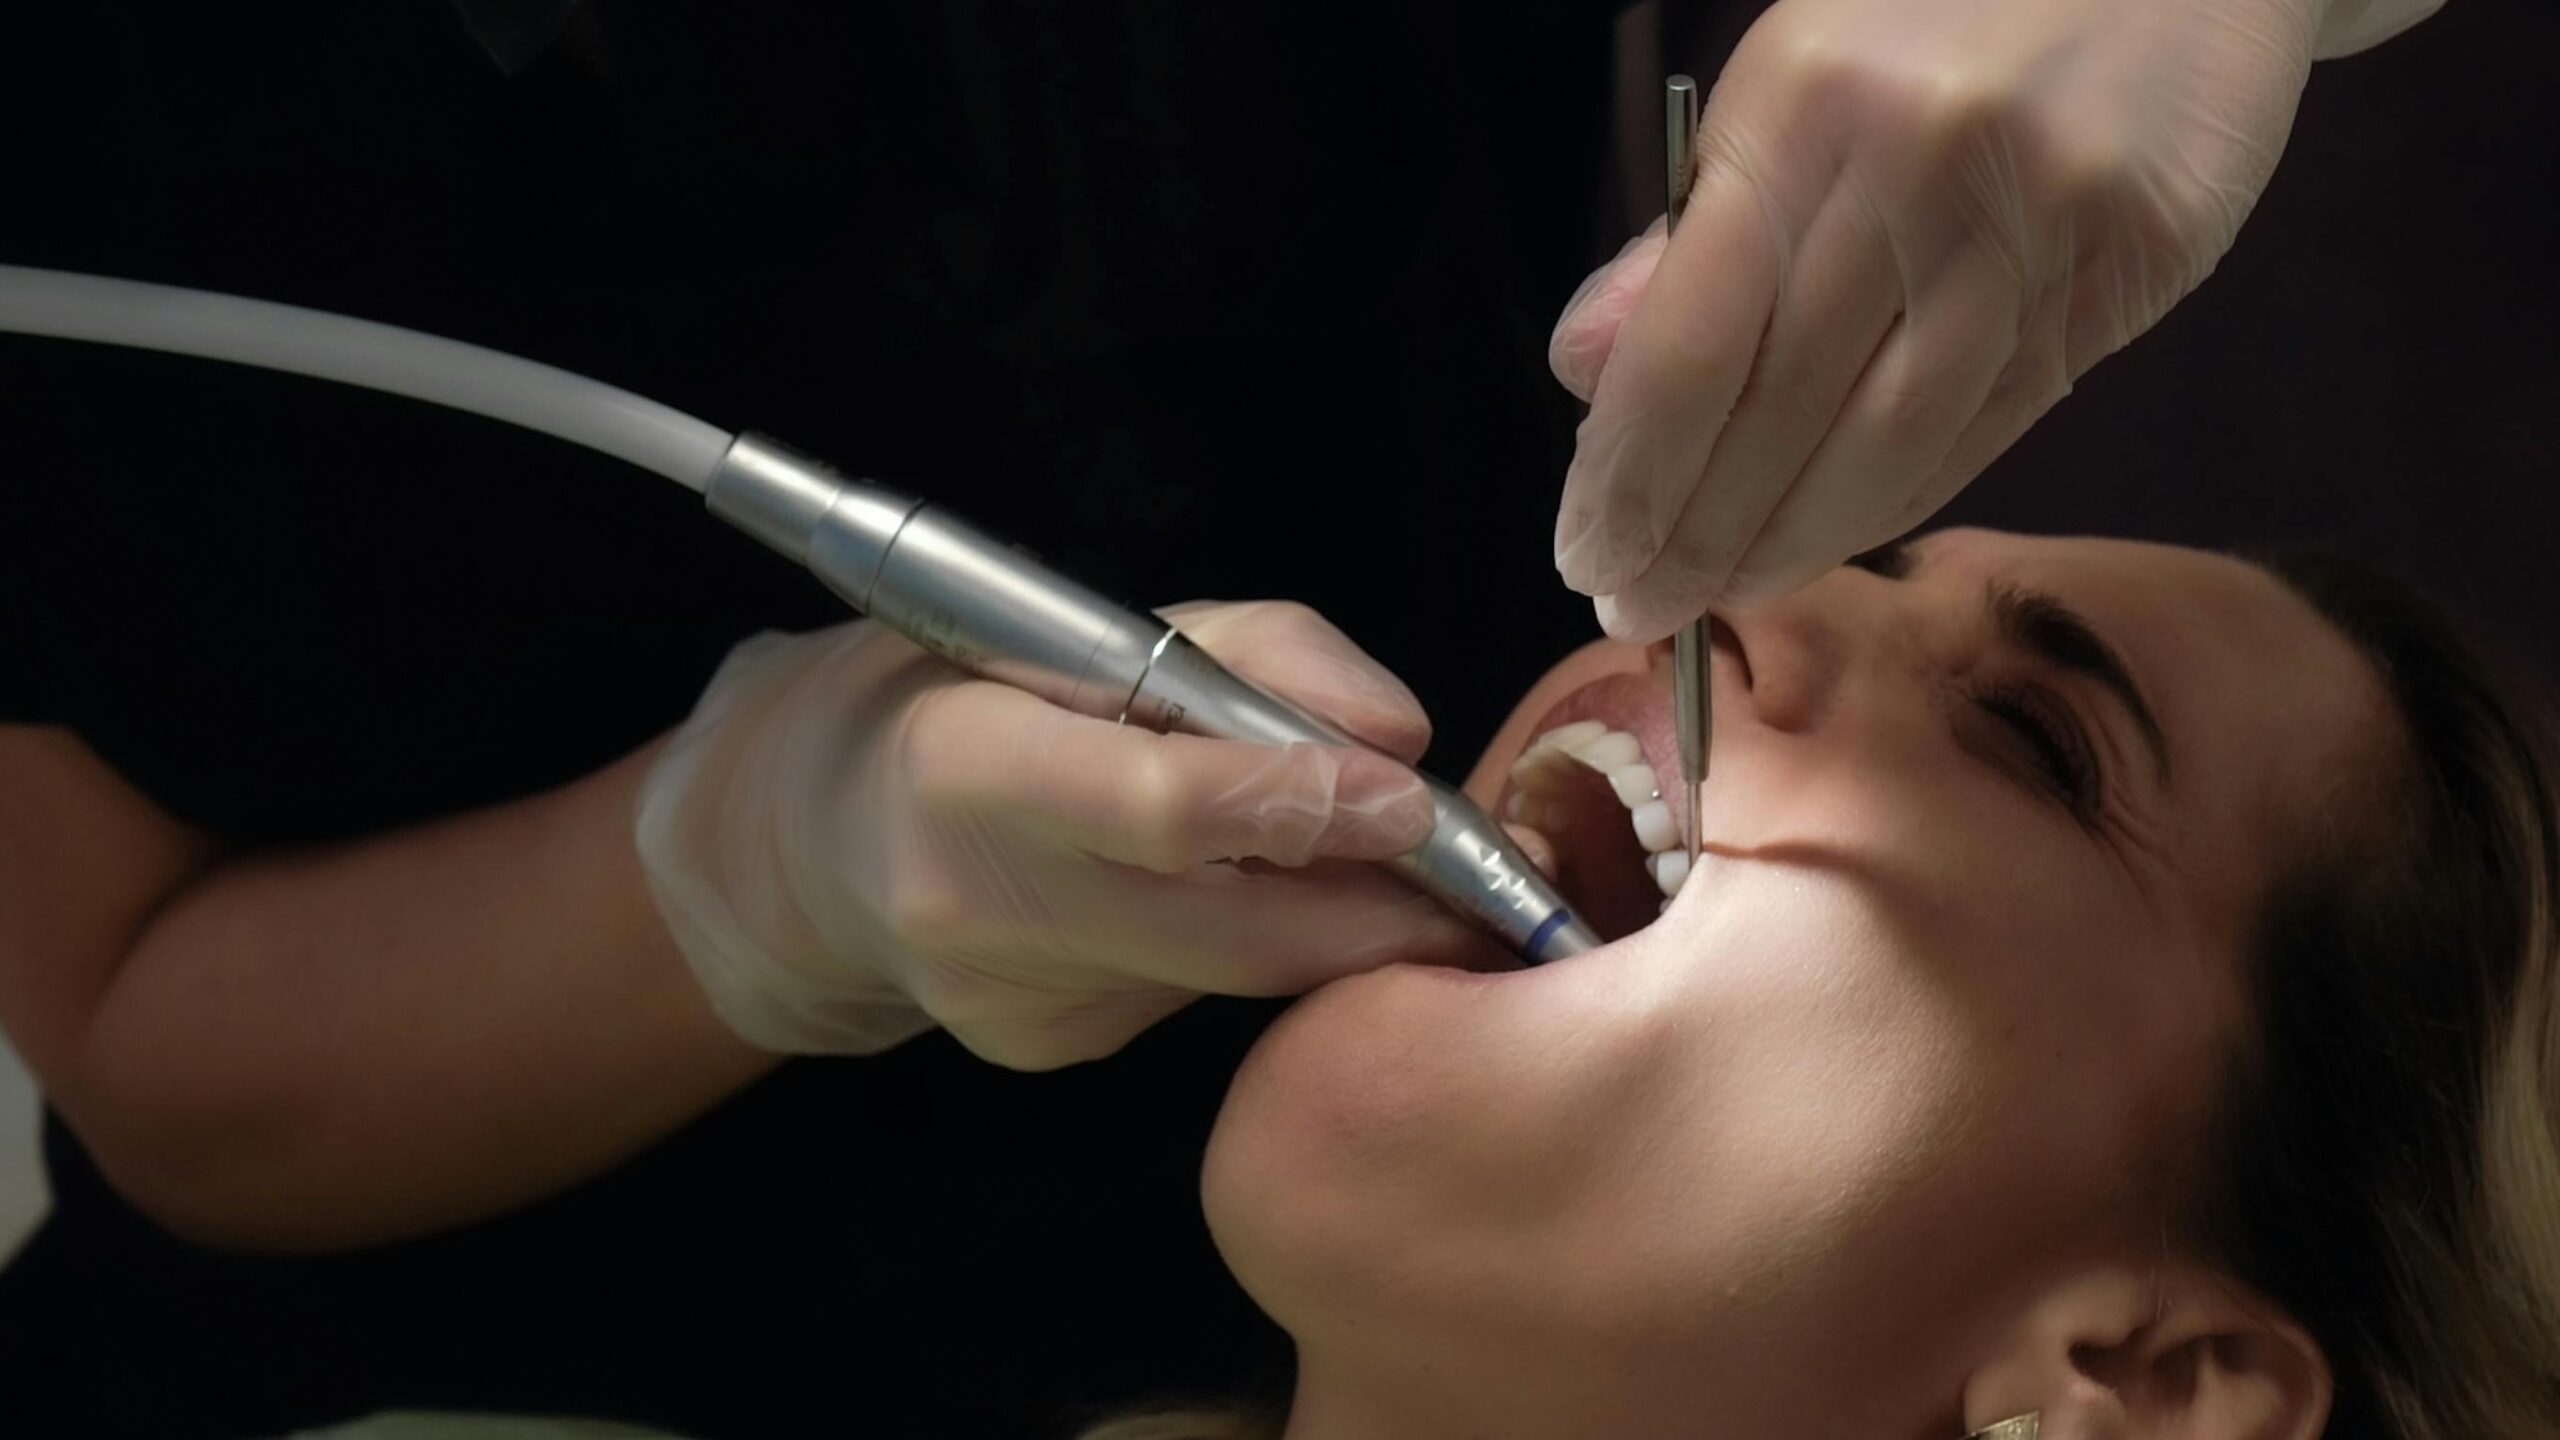 image of someone getting a wisdom tooth extraction - oral surgery